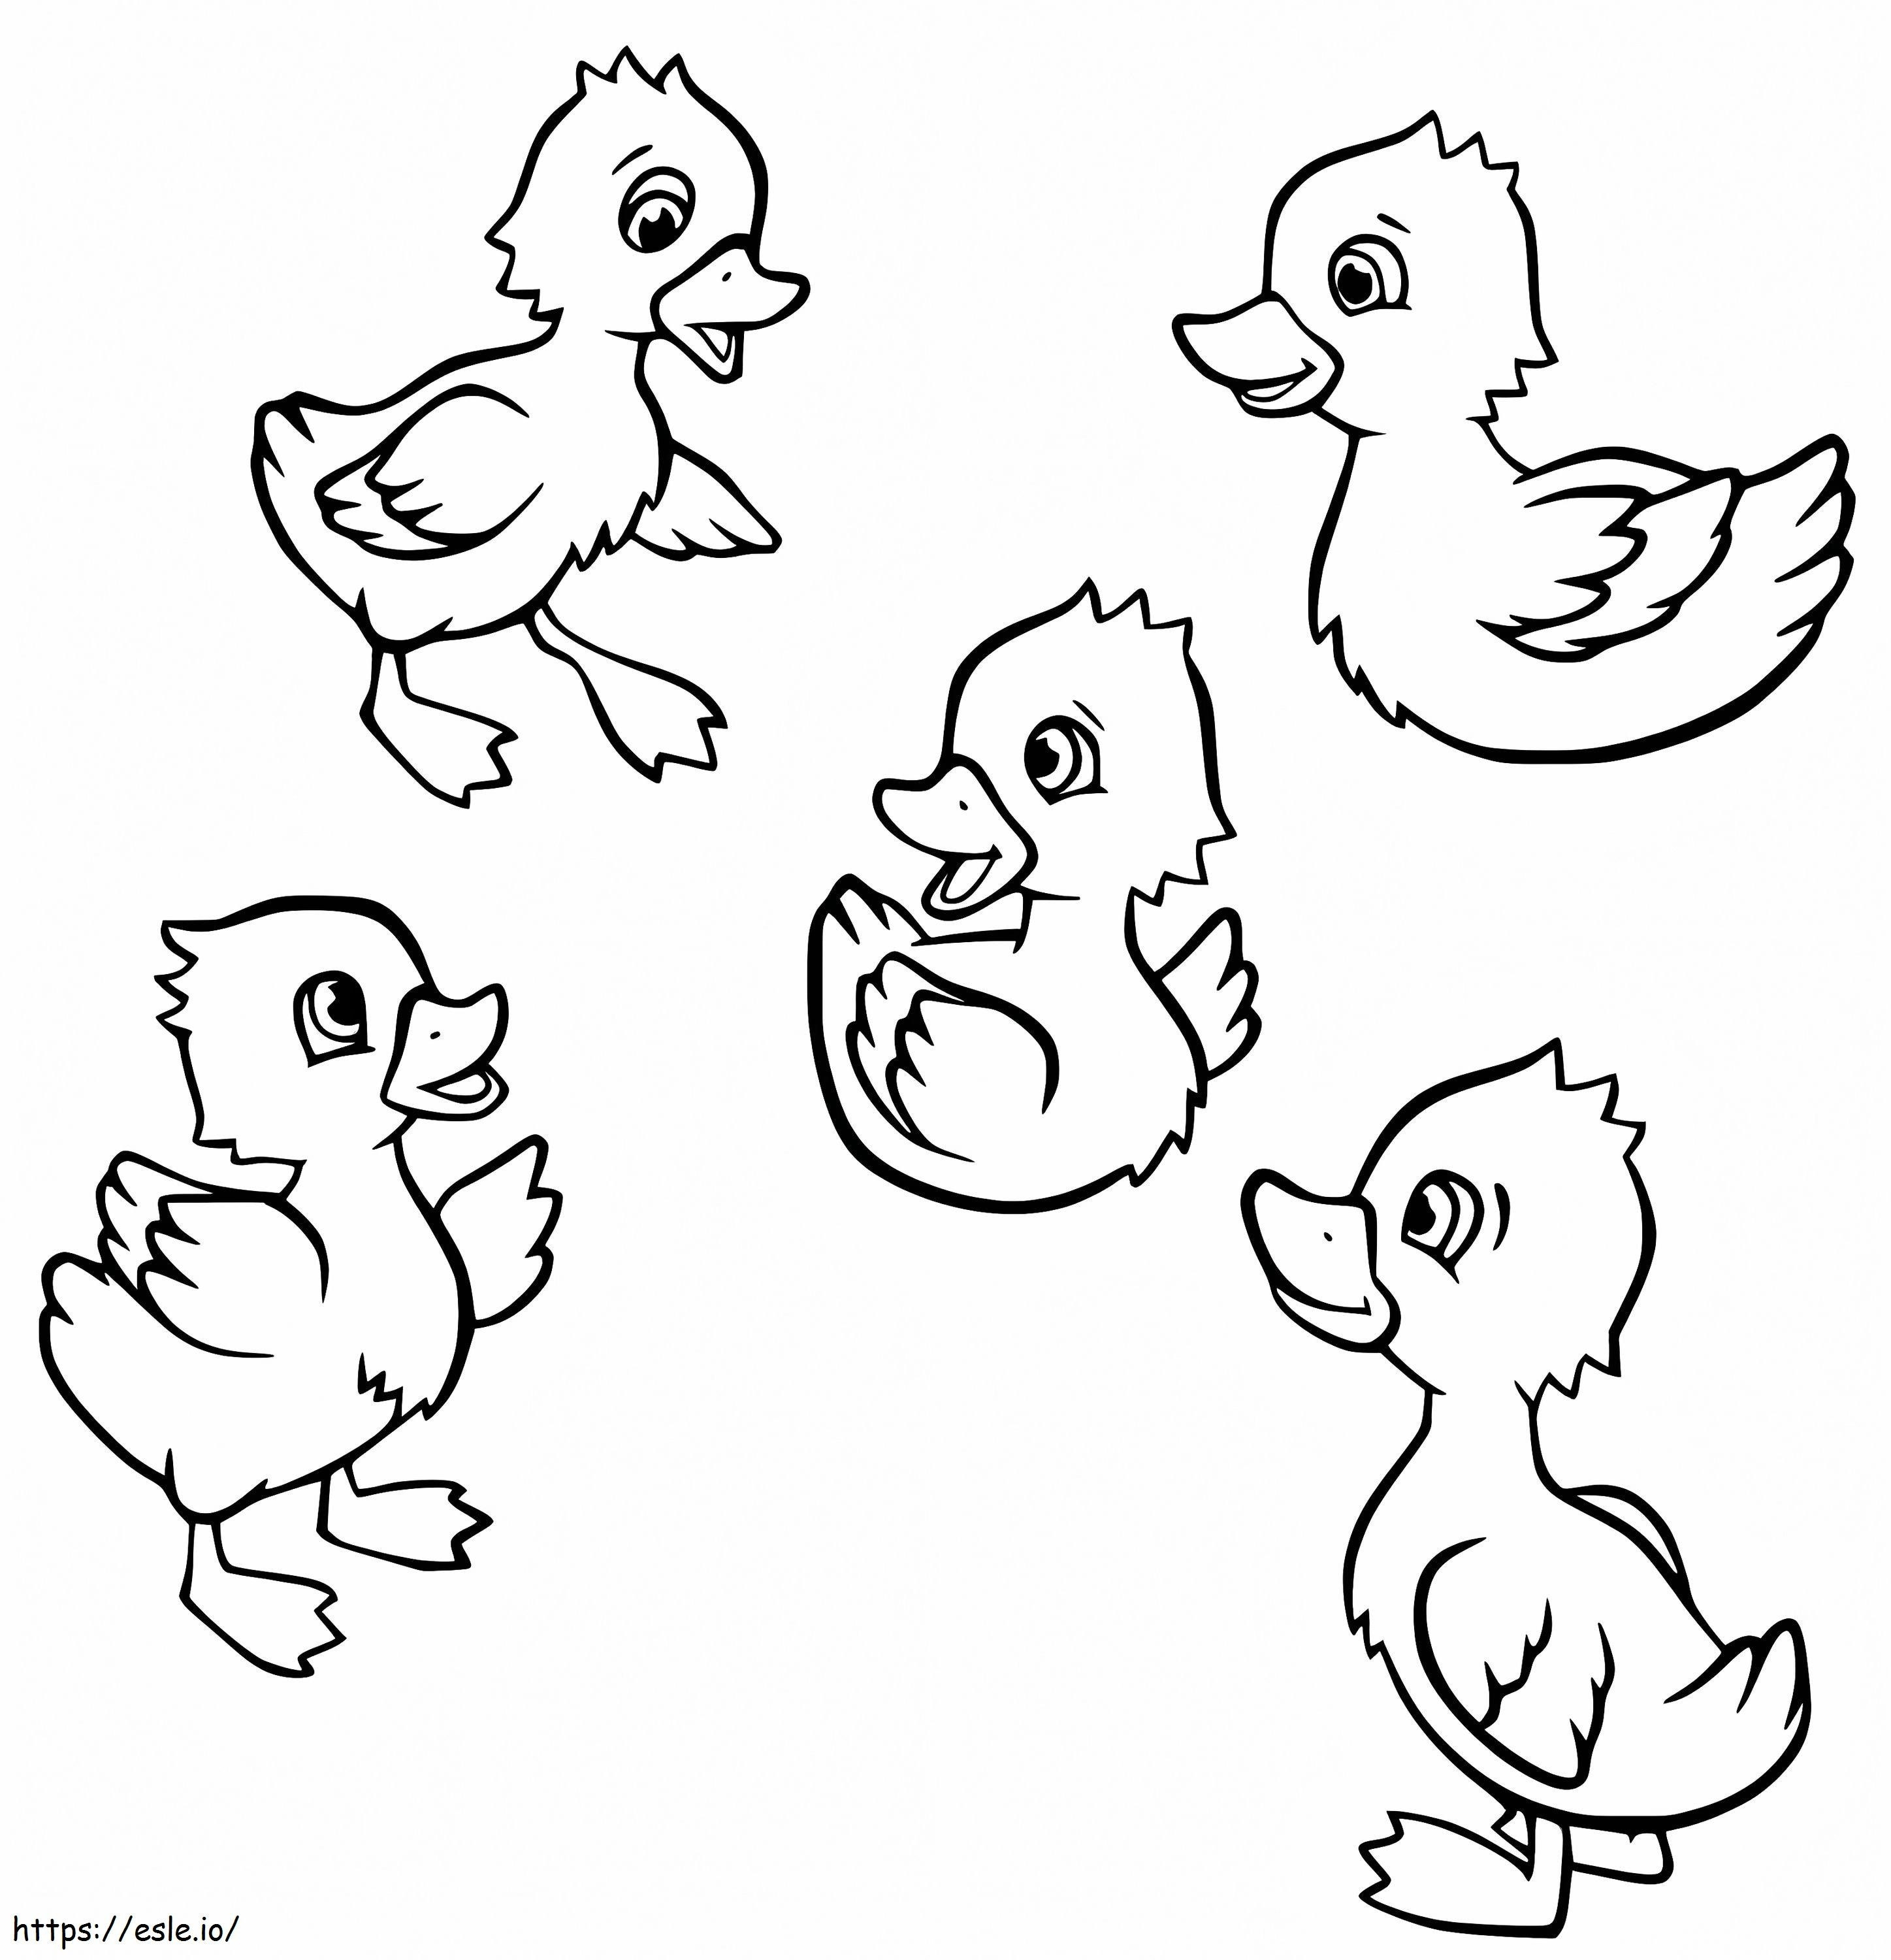 Five Ducklings coloring page